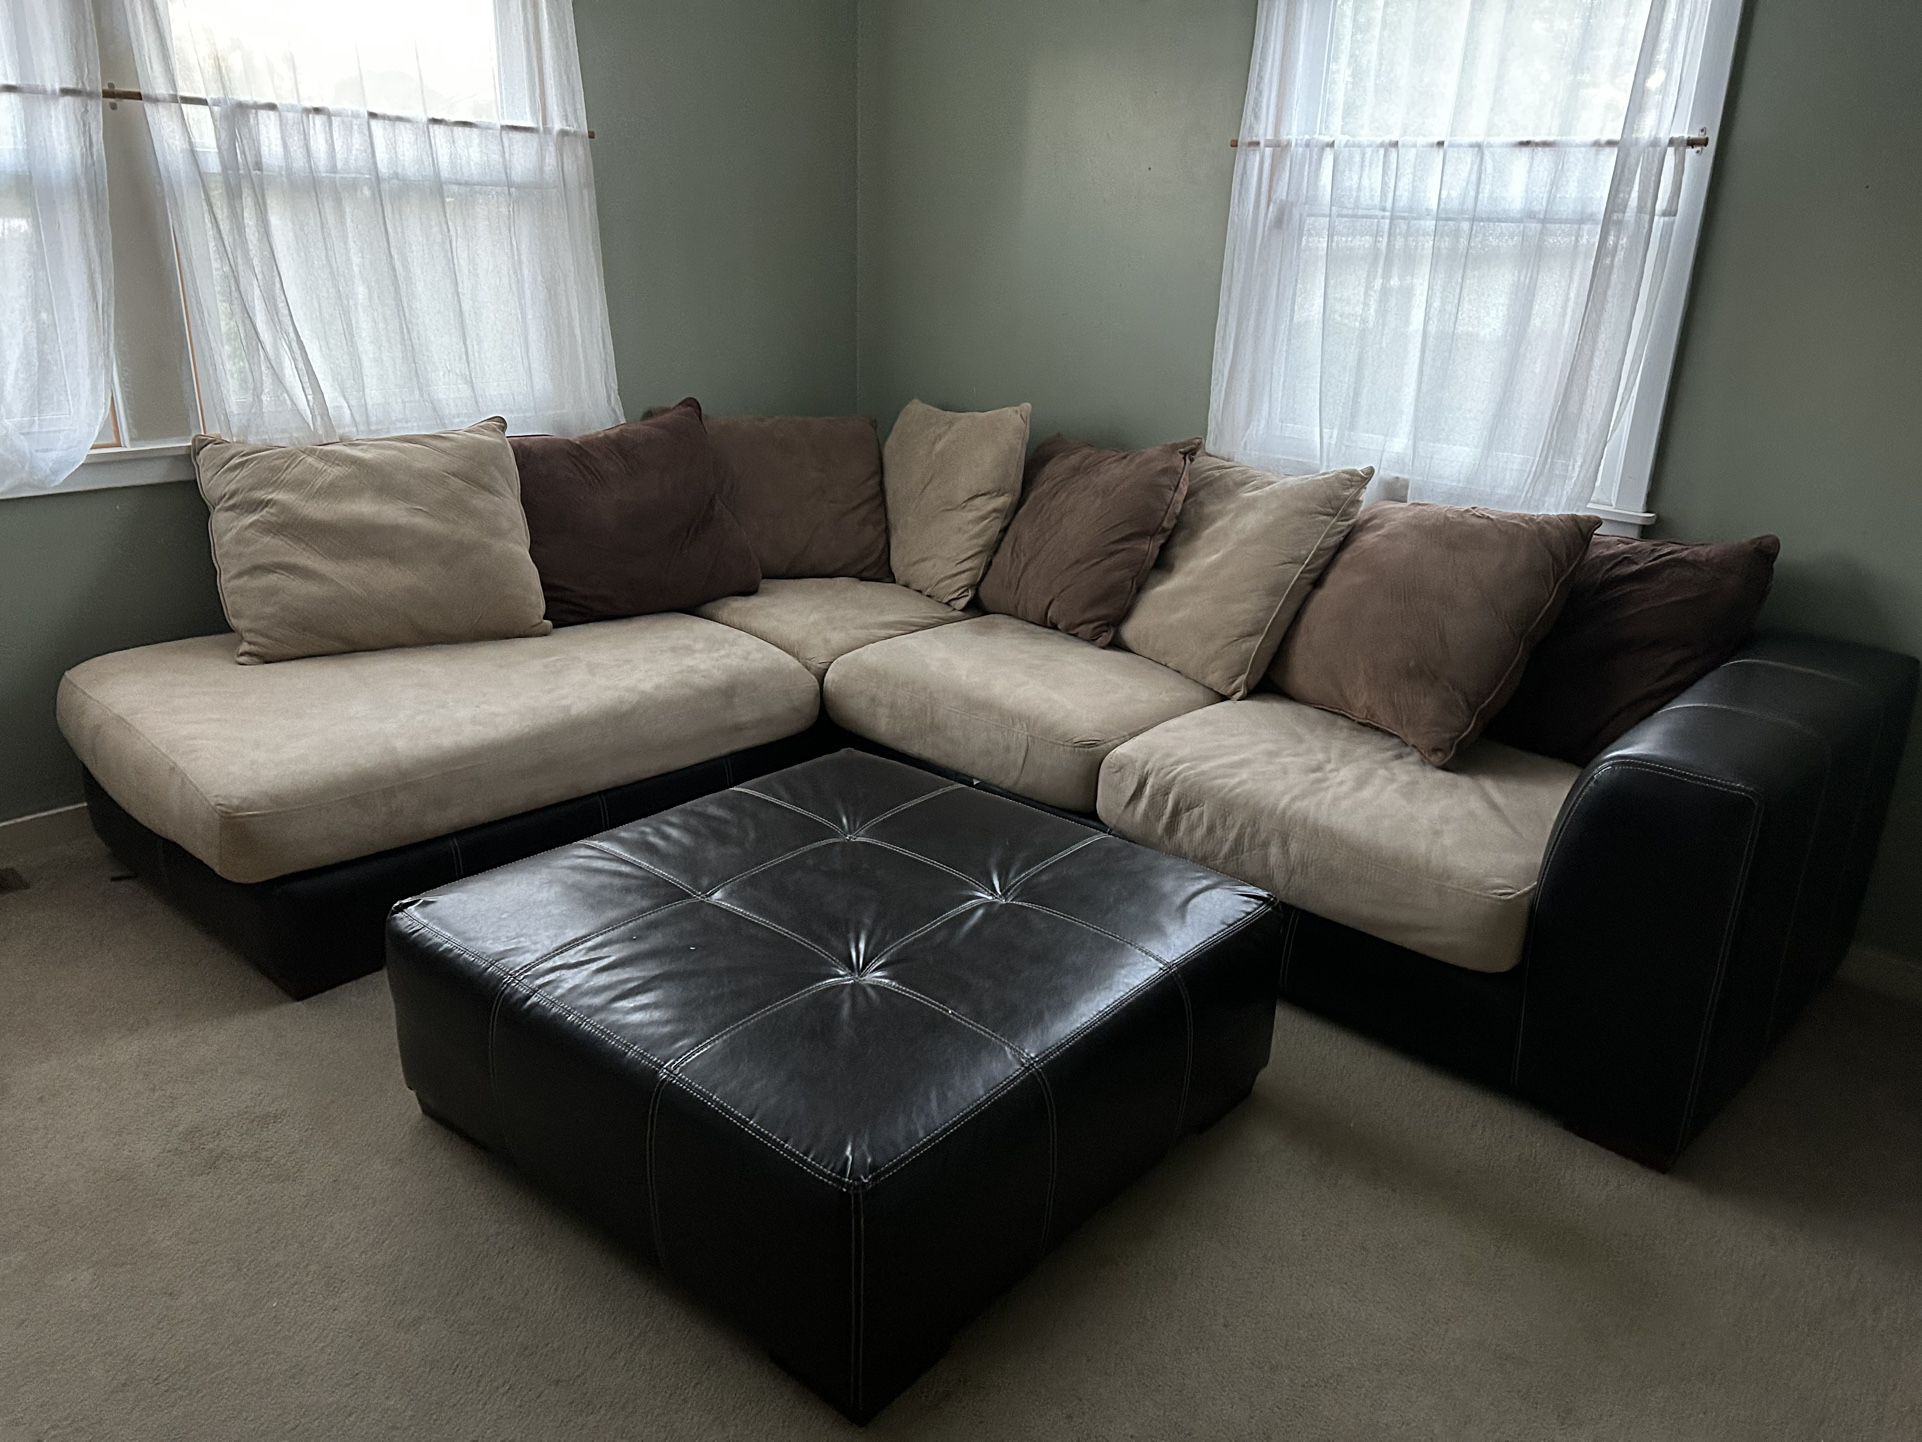 Couch and ottoman $50 OBO